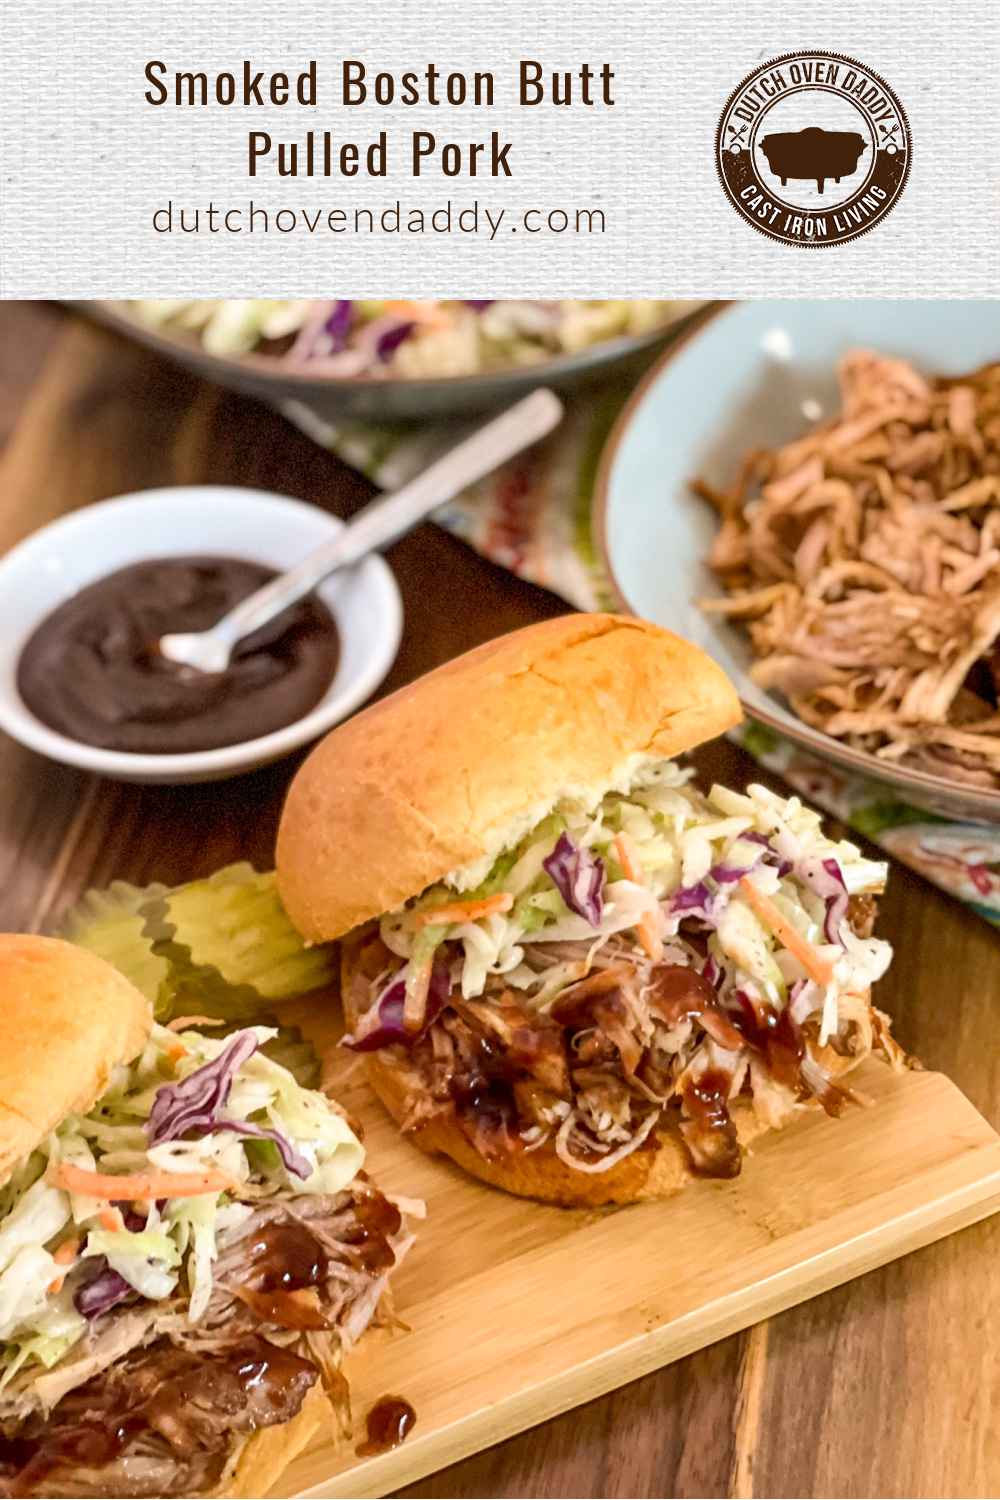 Branded image of Smoked Boston Butt Pulled pork. Two sandwiches drizzled with barbecue sauce and topped with coleslaw inside buns.